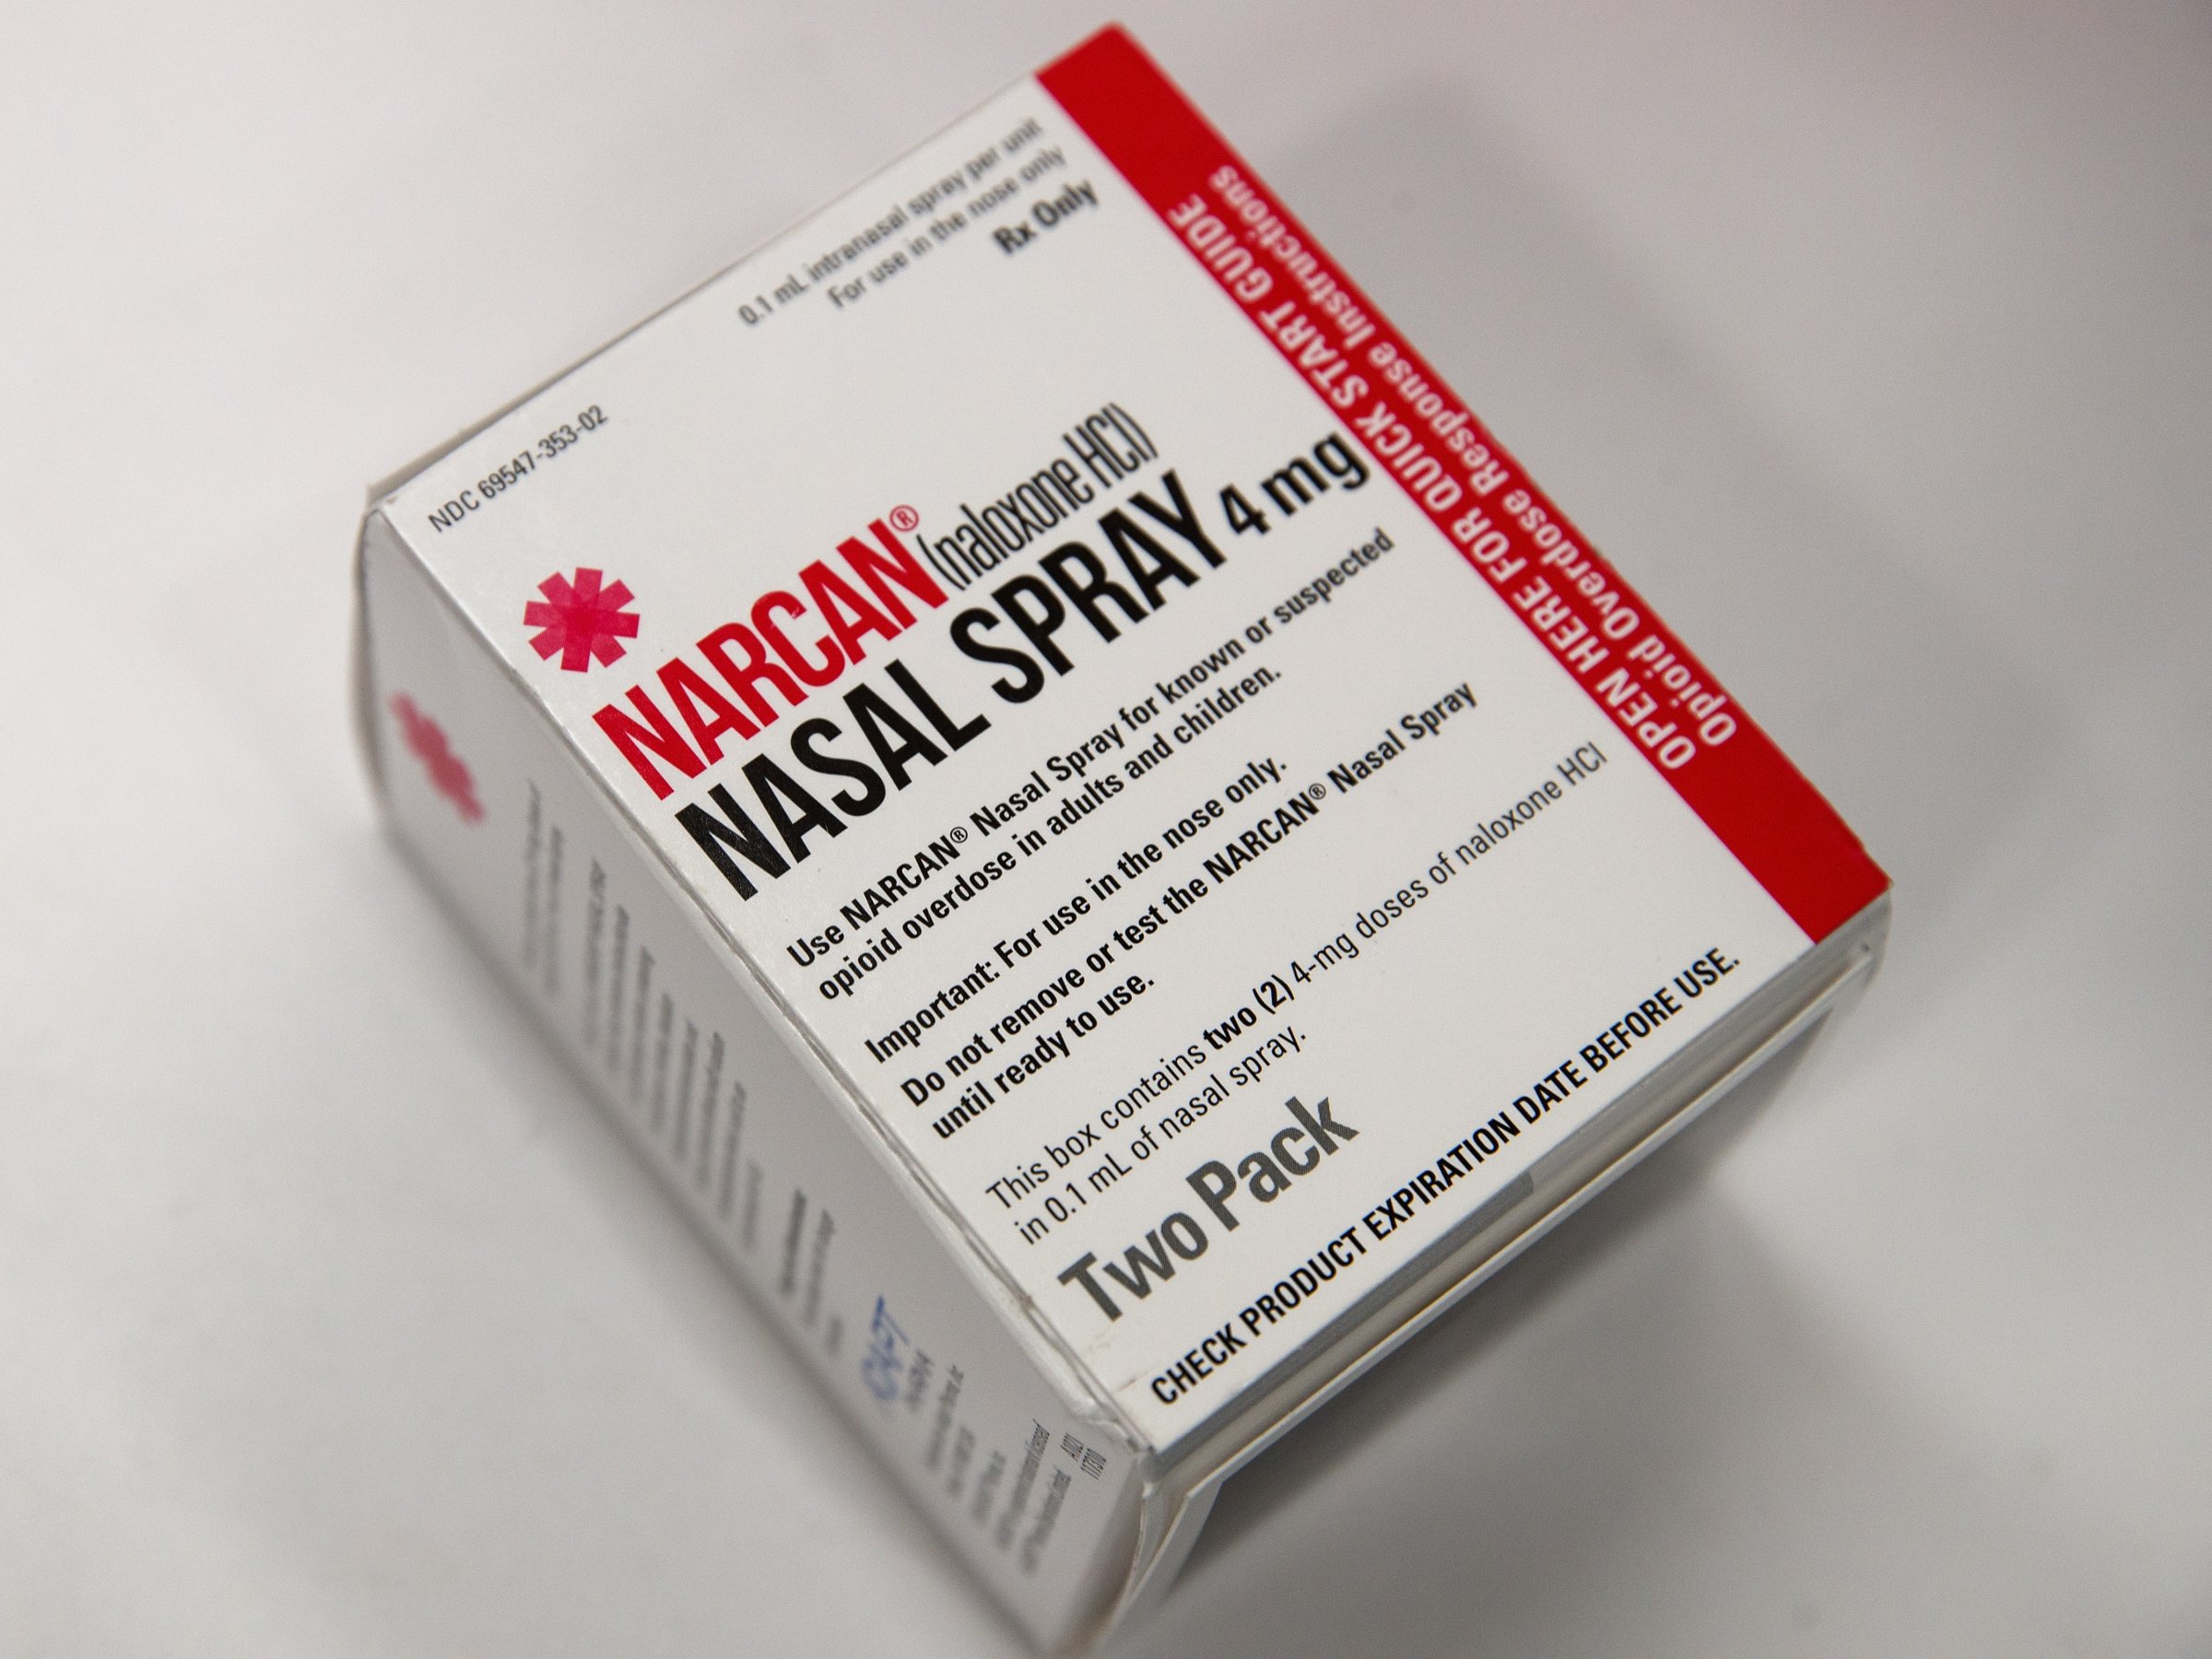 New York Becomes First State To Make Narcan Available At Pharmacies